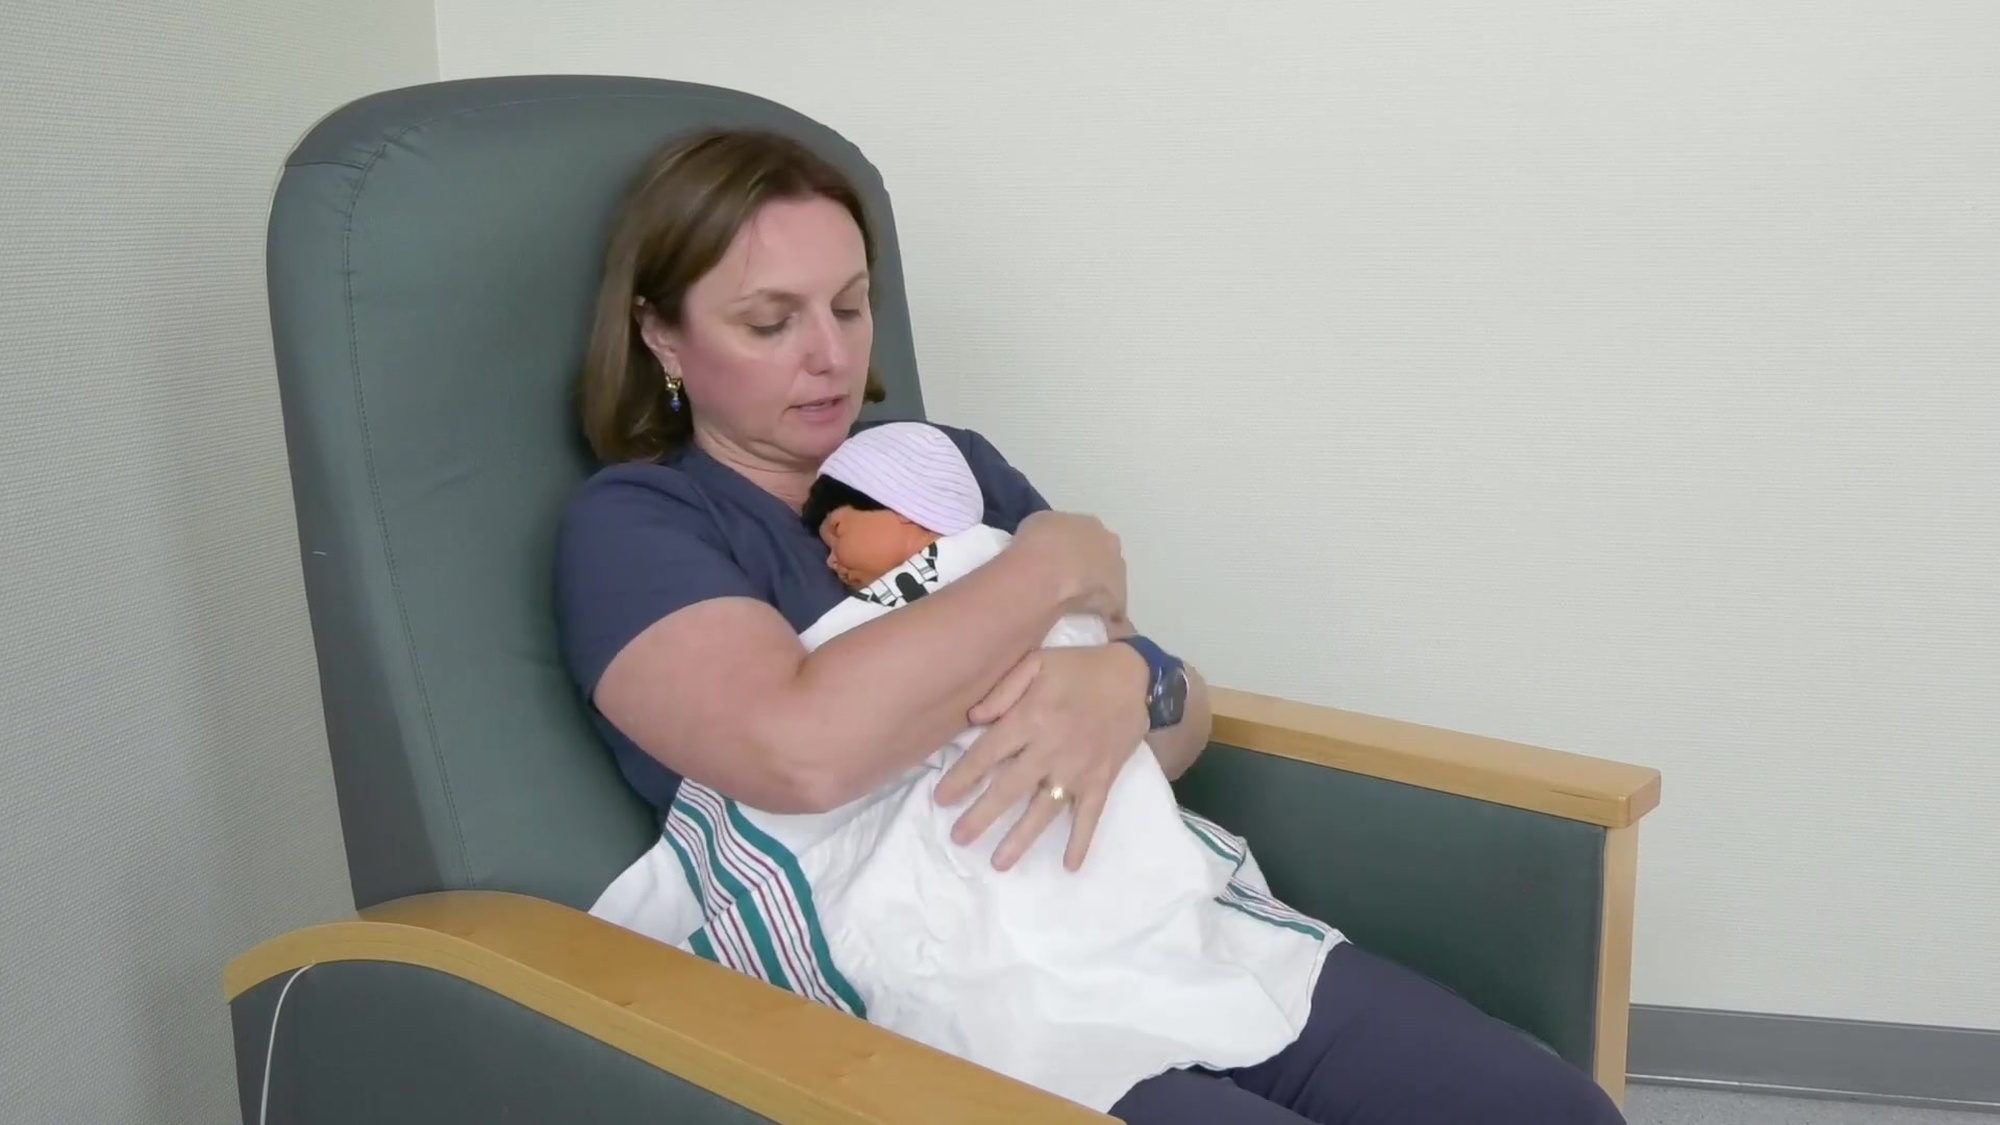 Landstuhl Regional Medical Center Registered Nurse and Certified Lactation Consultant, Elena Mattolin-Rakas, discusses lactation support for new and current parents.